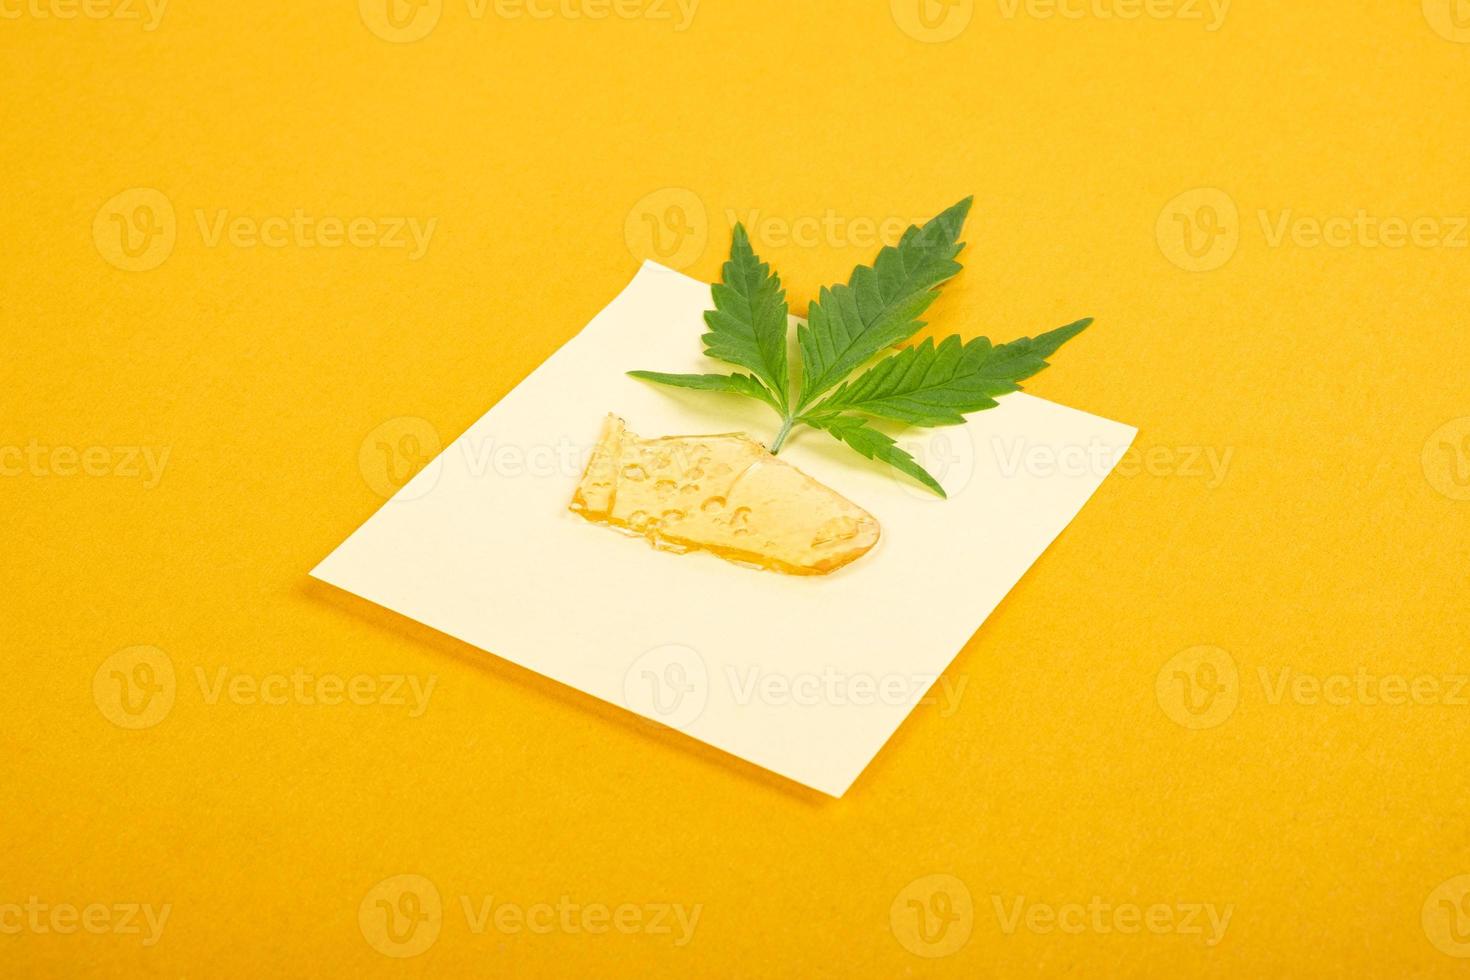 high thc, pieces of golden yellow cannabis wax and green leaf, marijuana concentrate photo